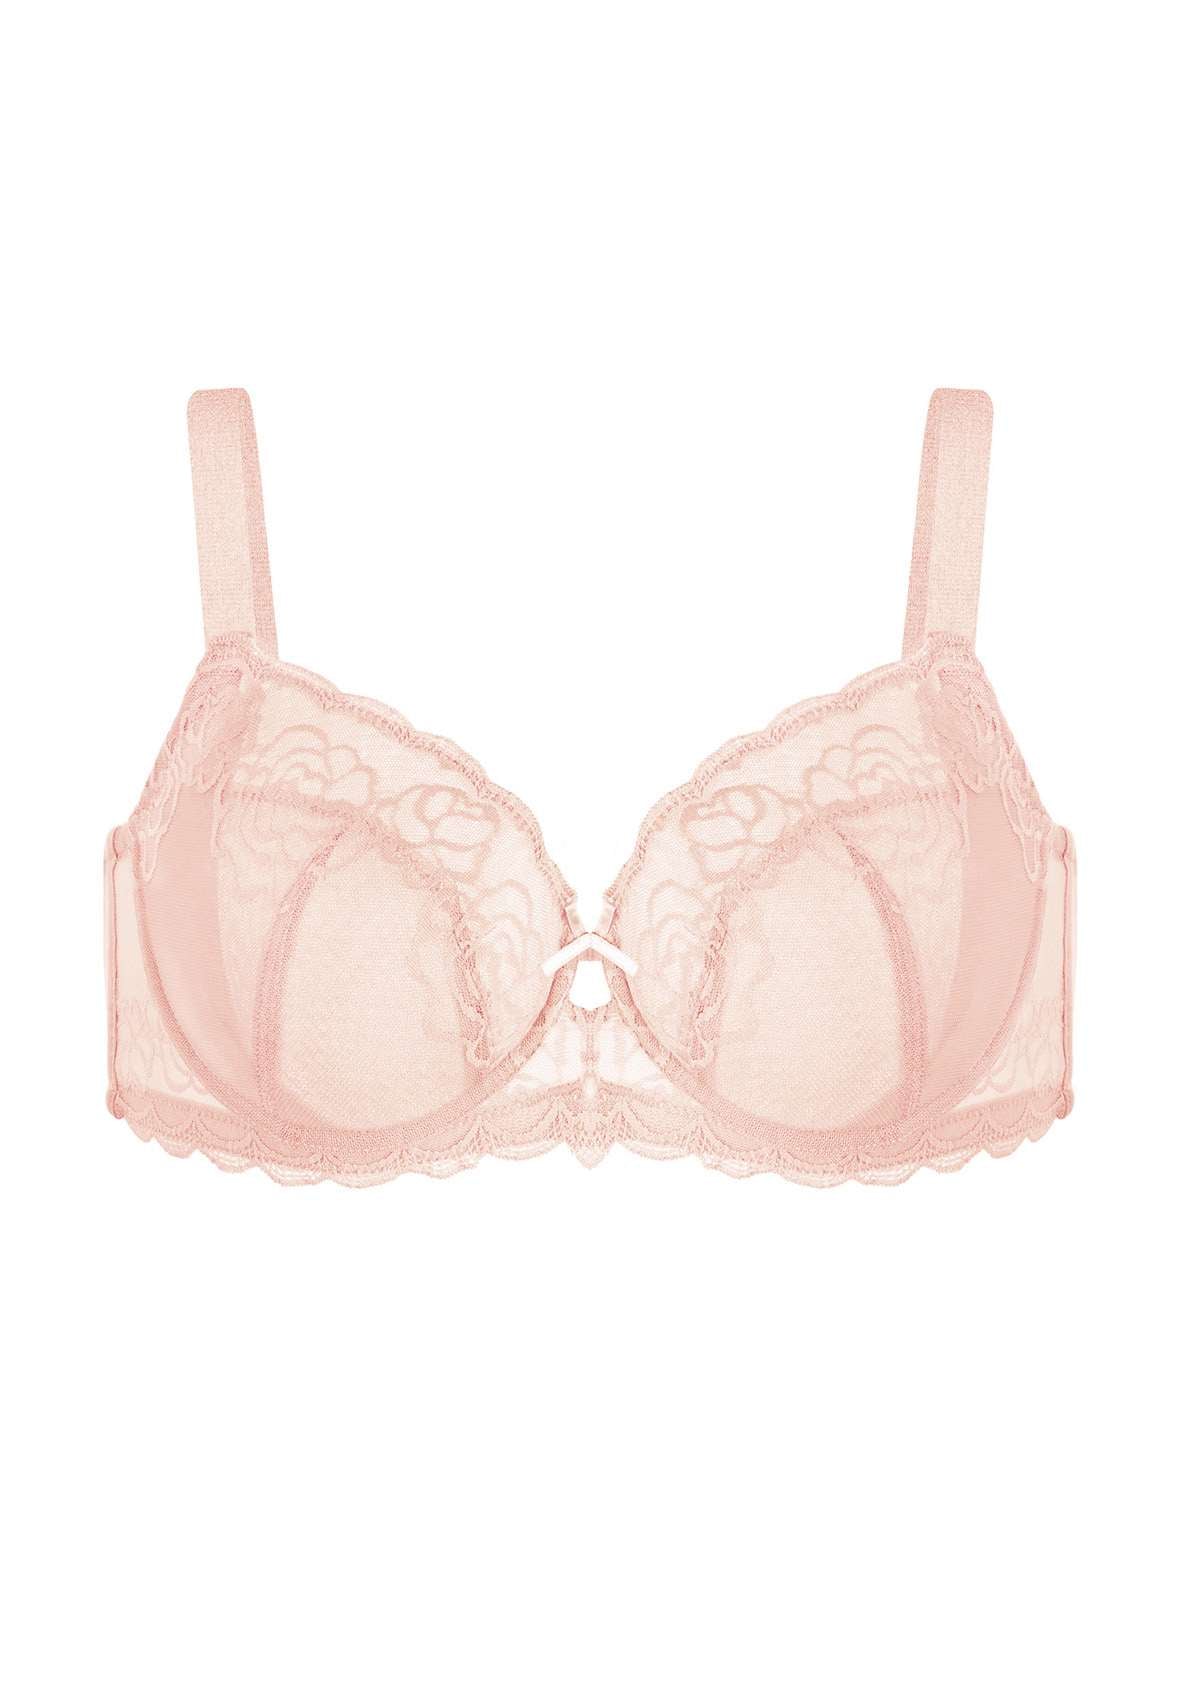 HSIA Rosa Bonica Sheer Lace Mesh Unlined Thin Comfy Woman Bra - Pink / 38 / C